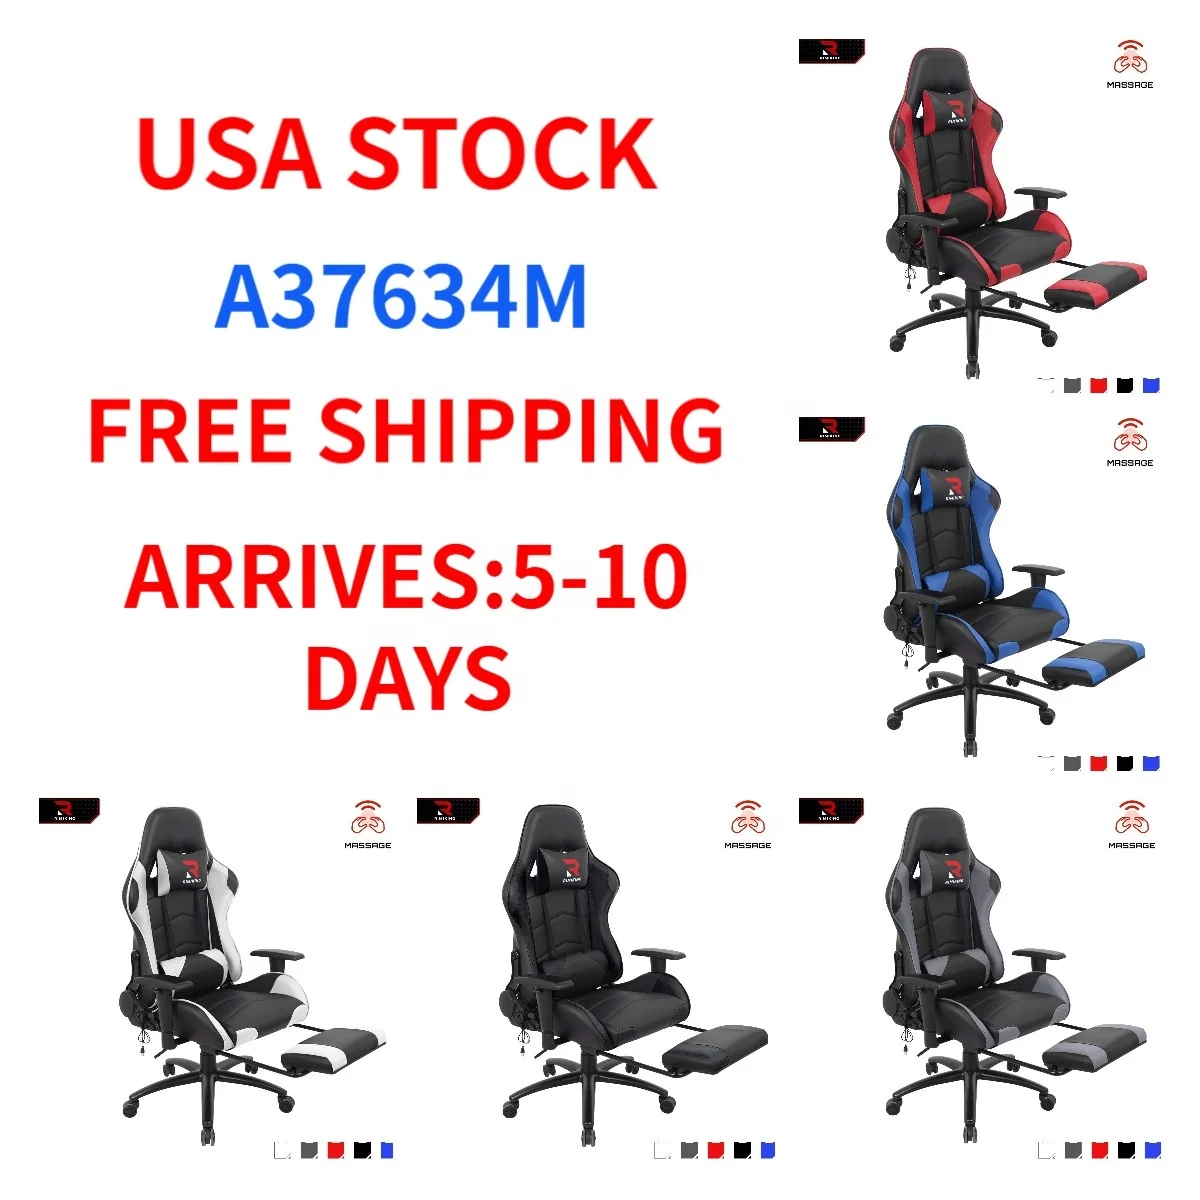 

Stock High Back Swivel Chair Racing Office Chair with Footrest Gaming Chair Free Shipping USA Black Office Furniture 360 Swivel